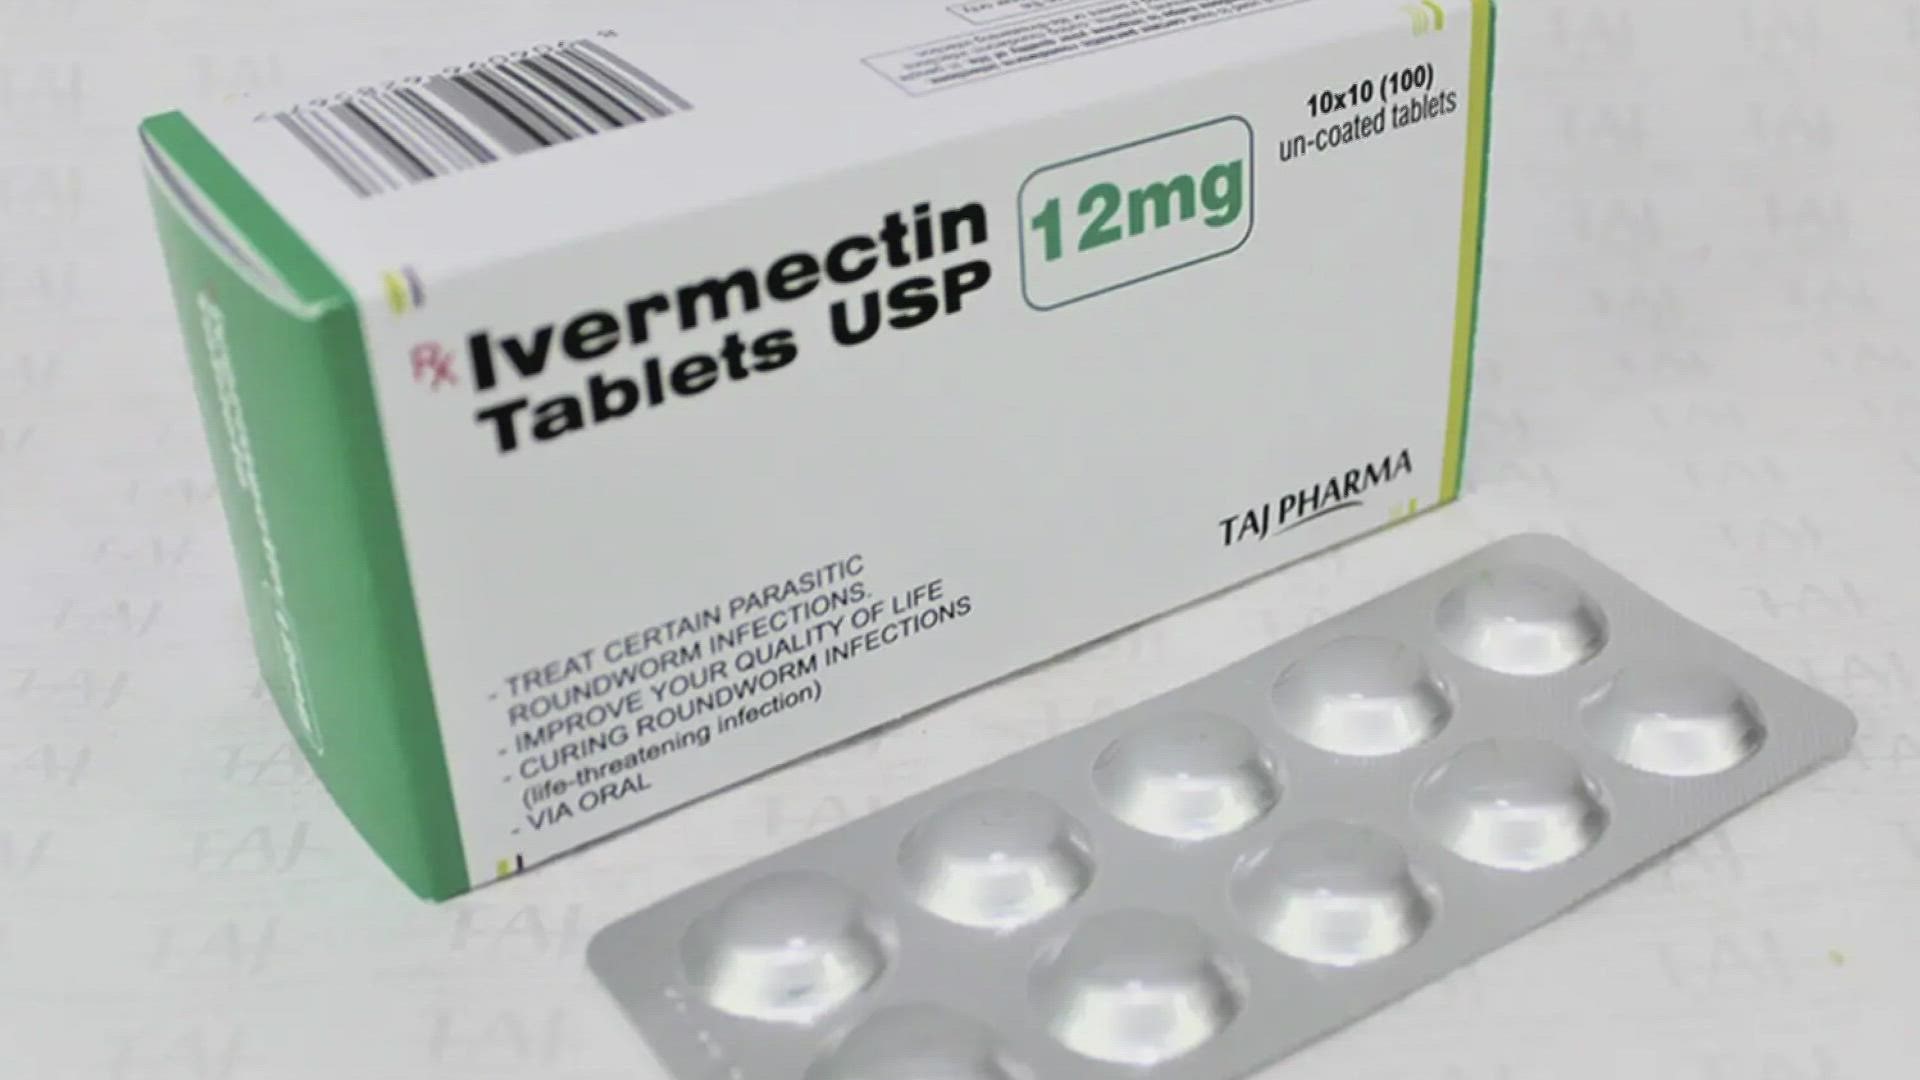 Health officials are debating the use of the medicine  Ivermectin to treat COVID-19. Many say it is not safe for human usage.